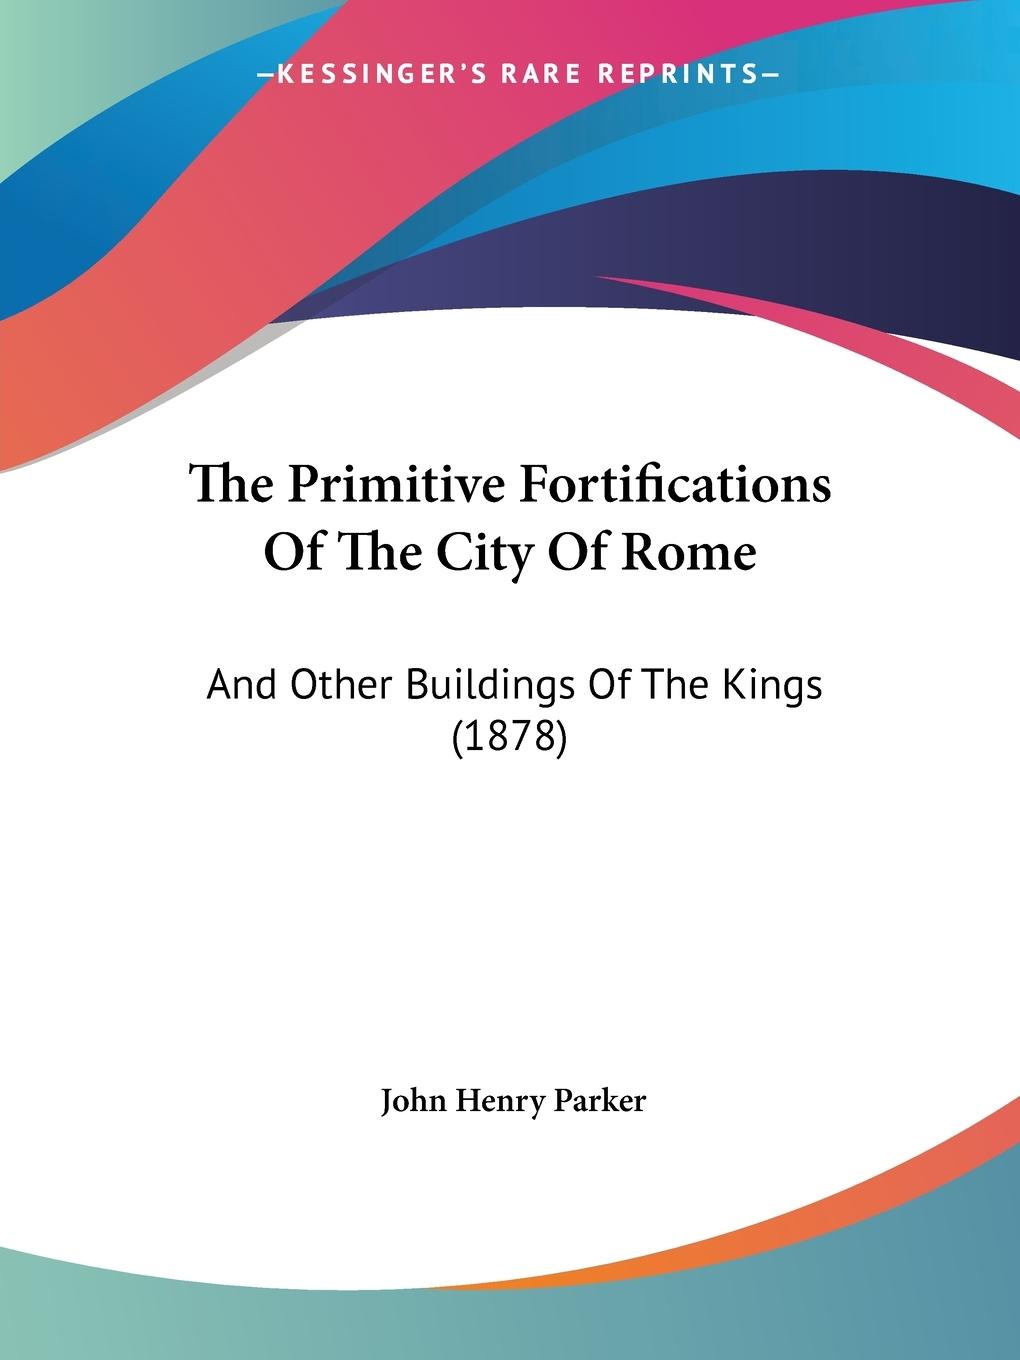 The Primitive Fortifications Of The City Of Rome - Parker, John Henry